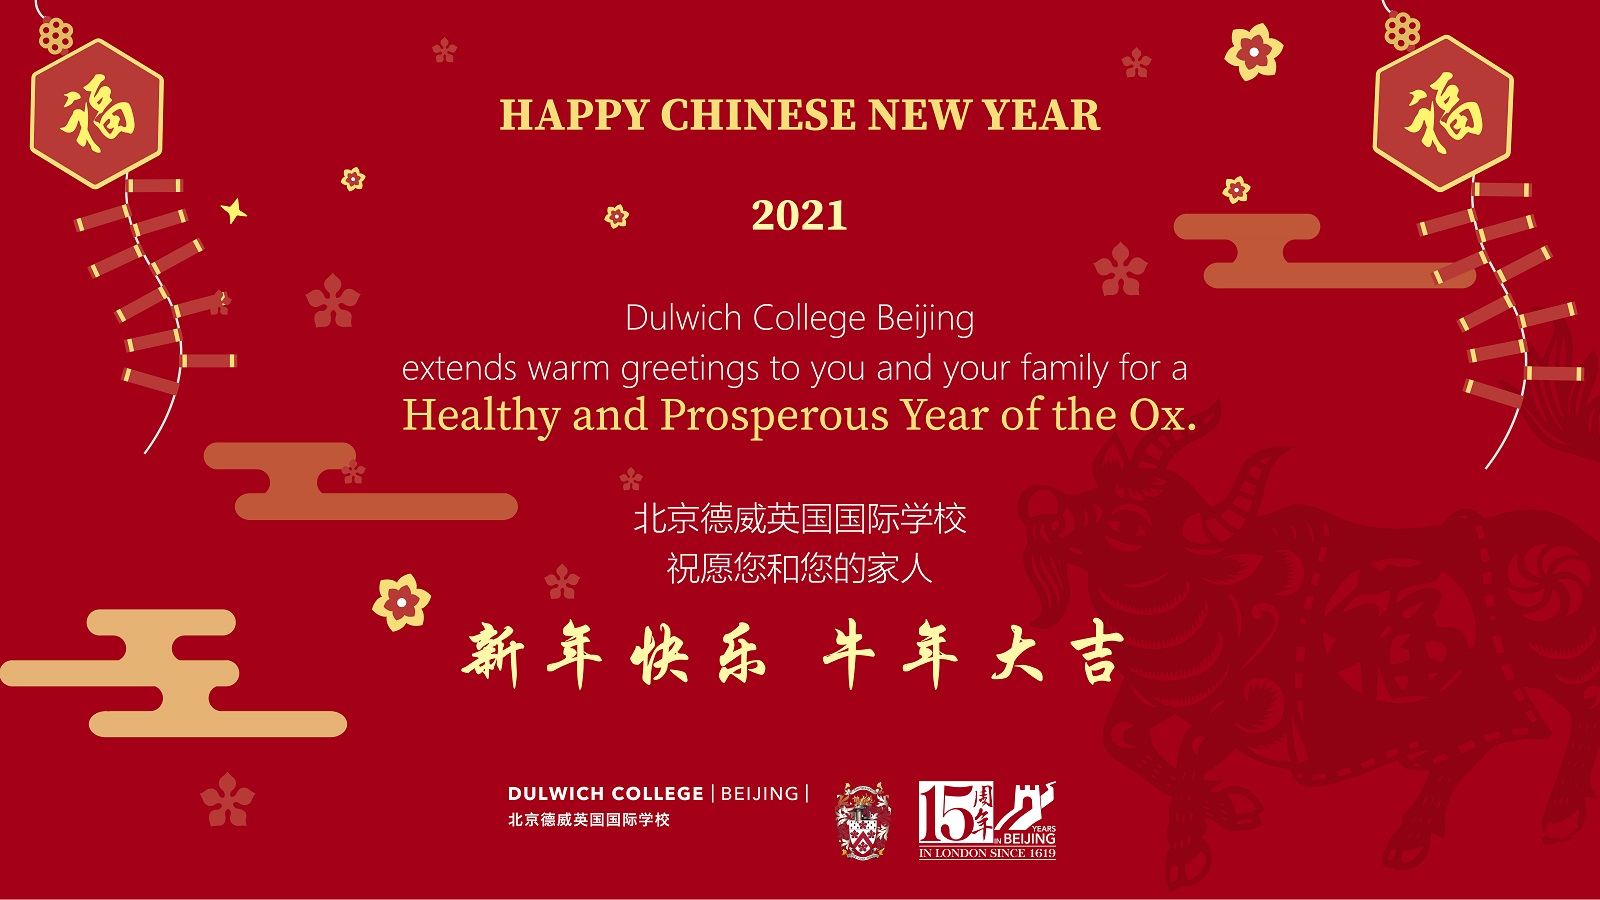 Chinese New Year's e-card